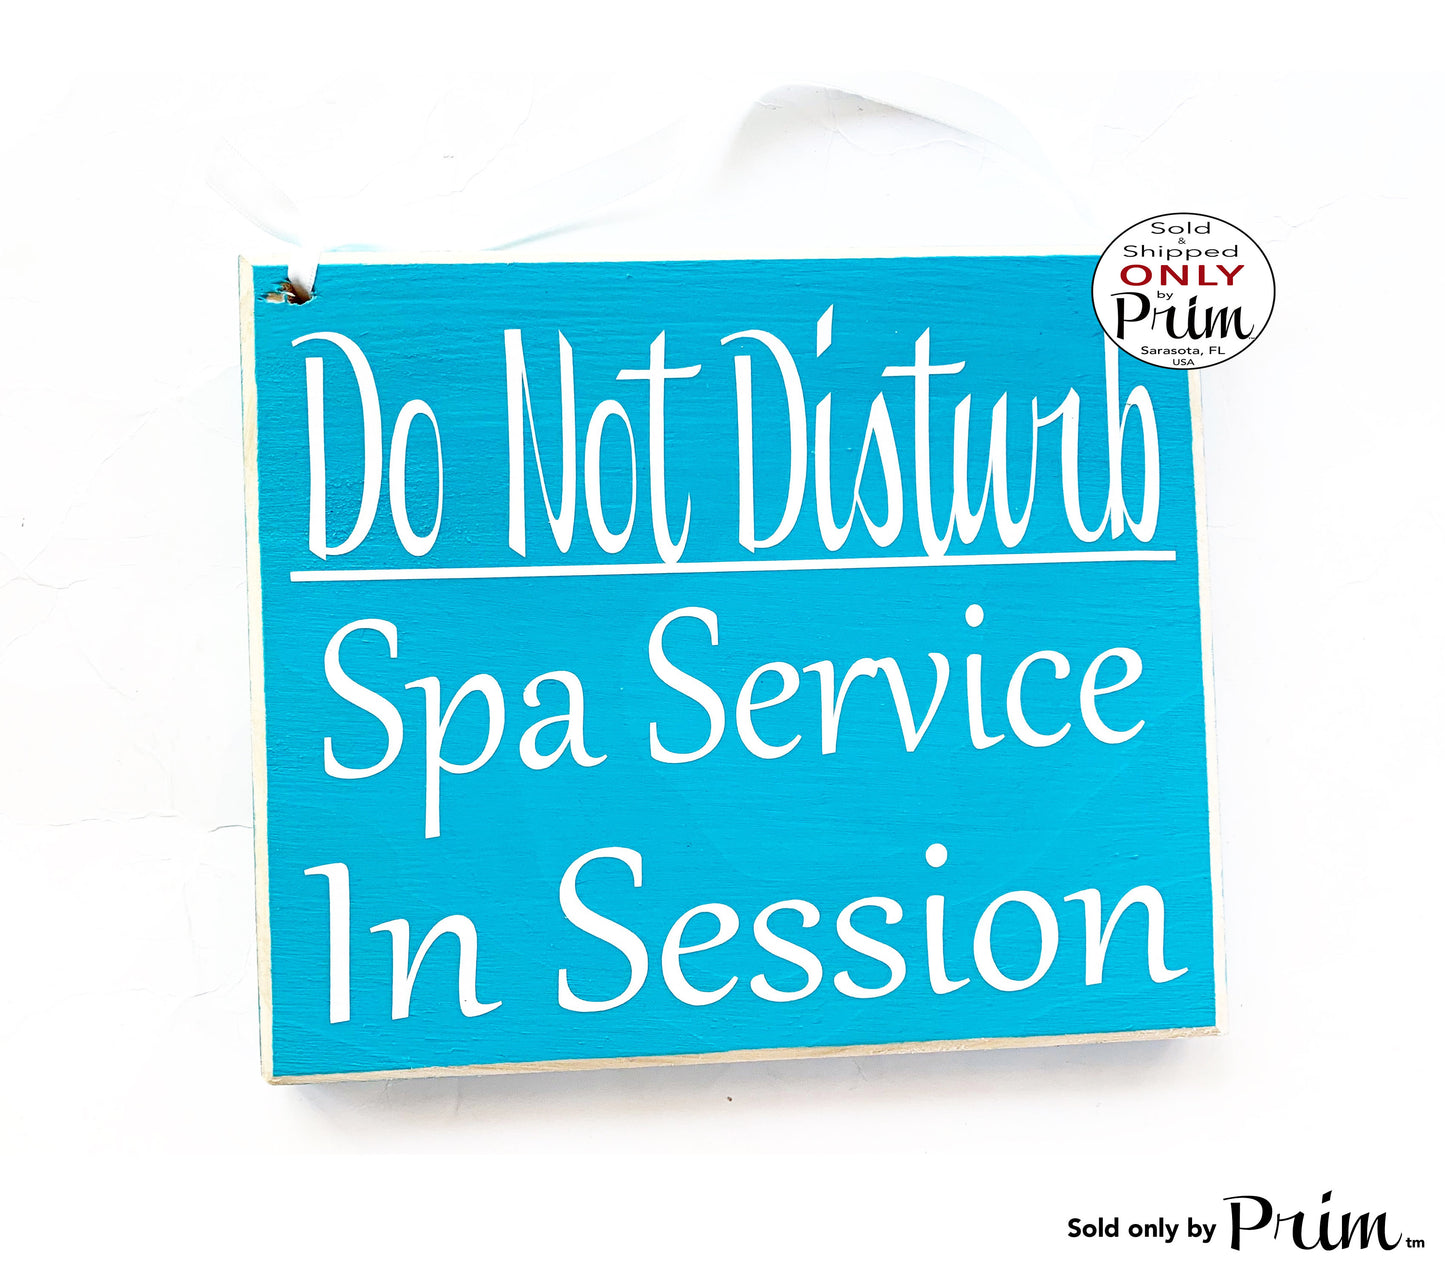 8x8 Do Not Disturb Spa Service In Session Custom Wood Sign | Treatment Massage Facial Waxing Lashes Brows Consultation Progress Door Plaque